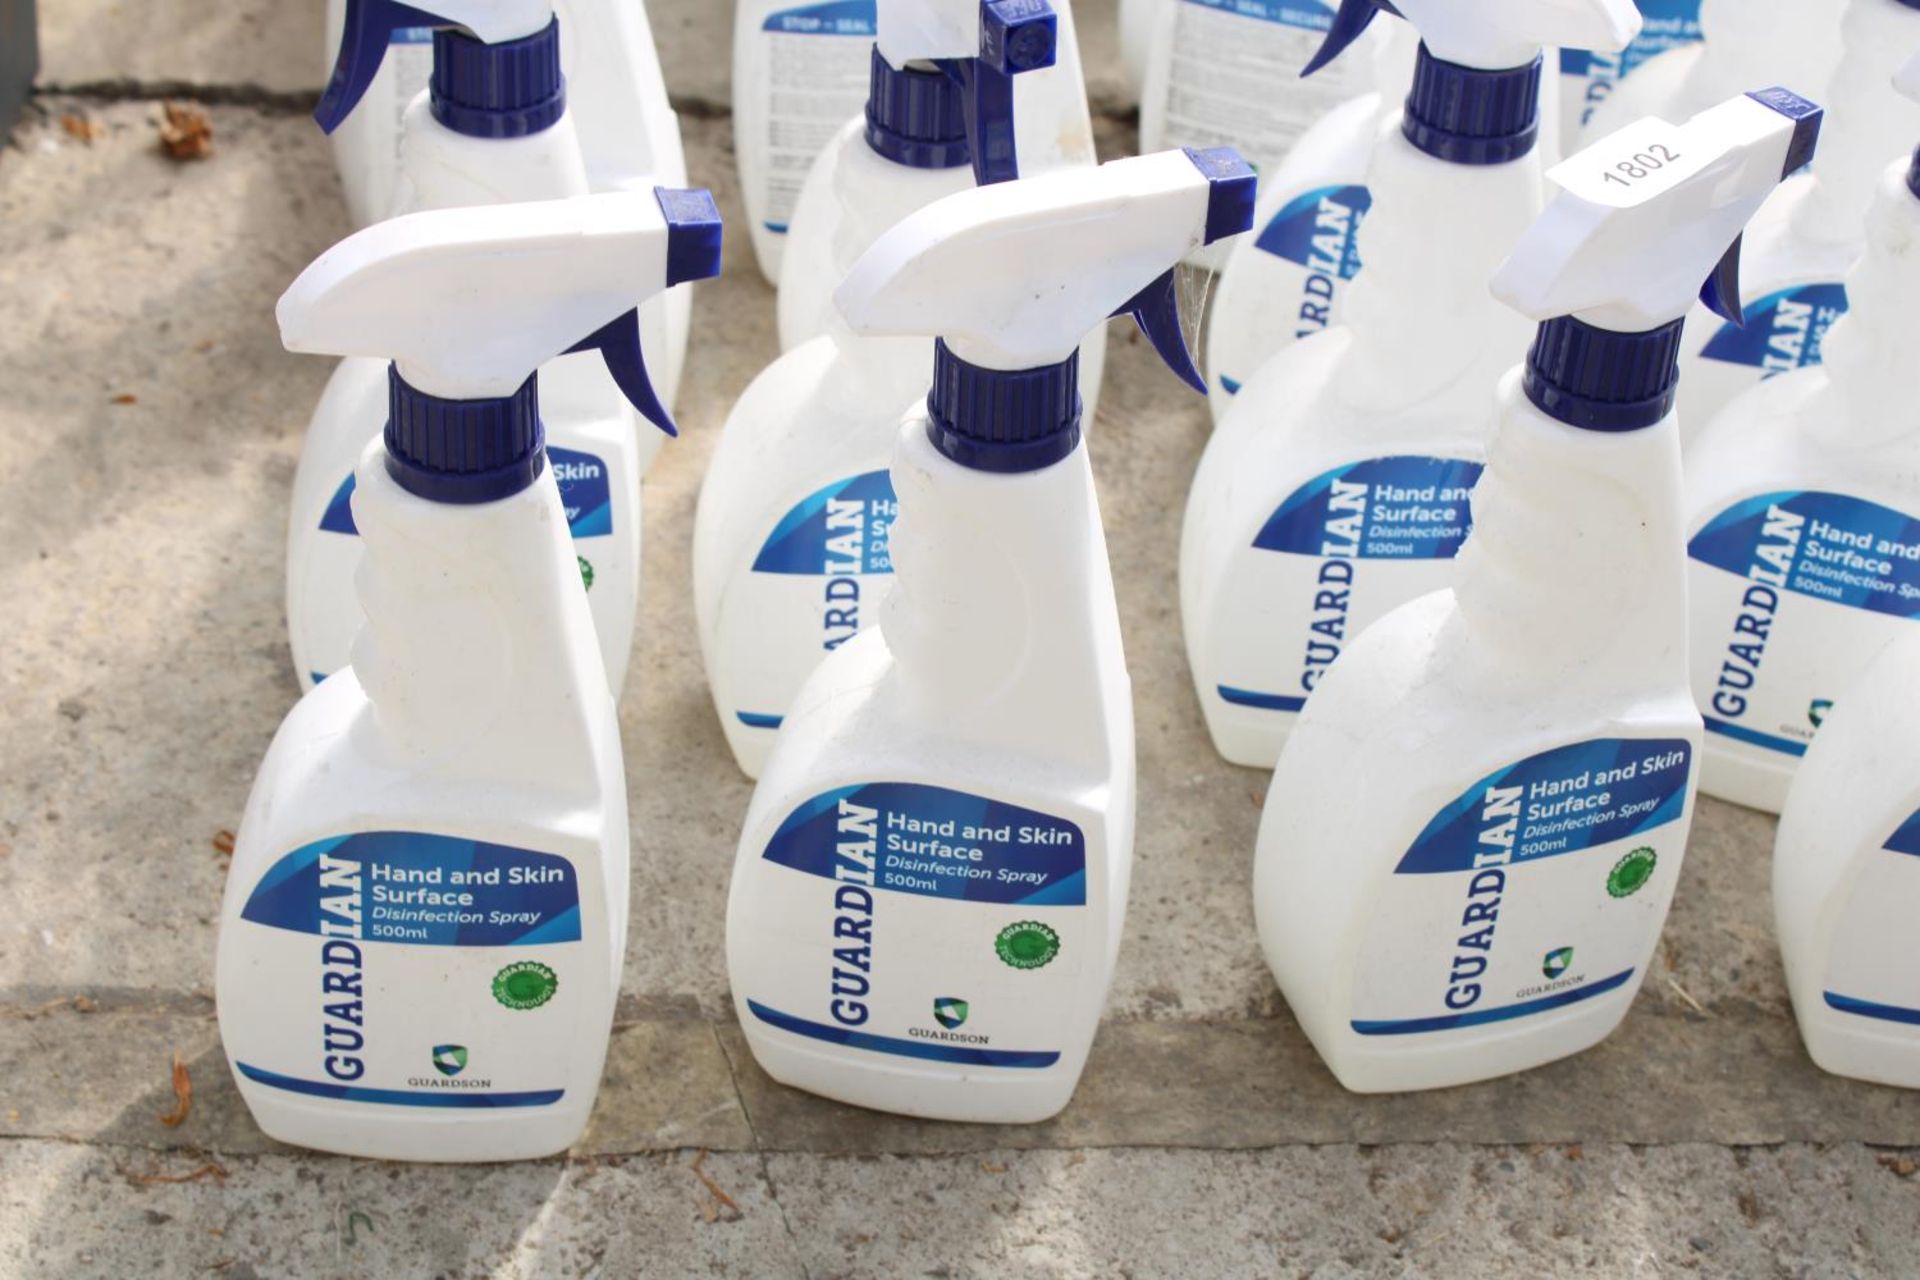 A LARGE QUANTITY OF GUARDIAN HAND AND SKIN SURFACE DISINFECTANT SPRAY - Image 2 of 2